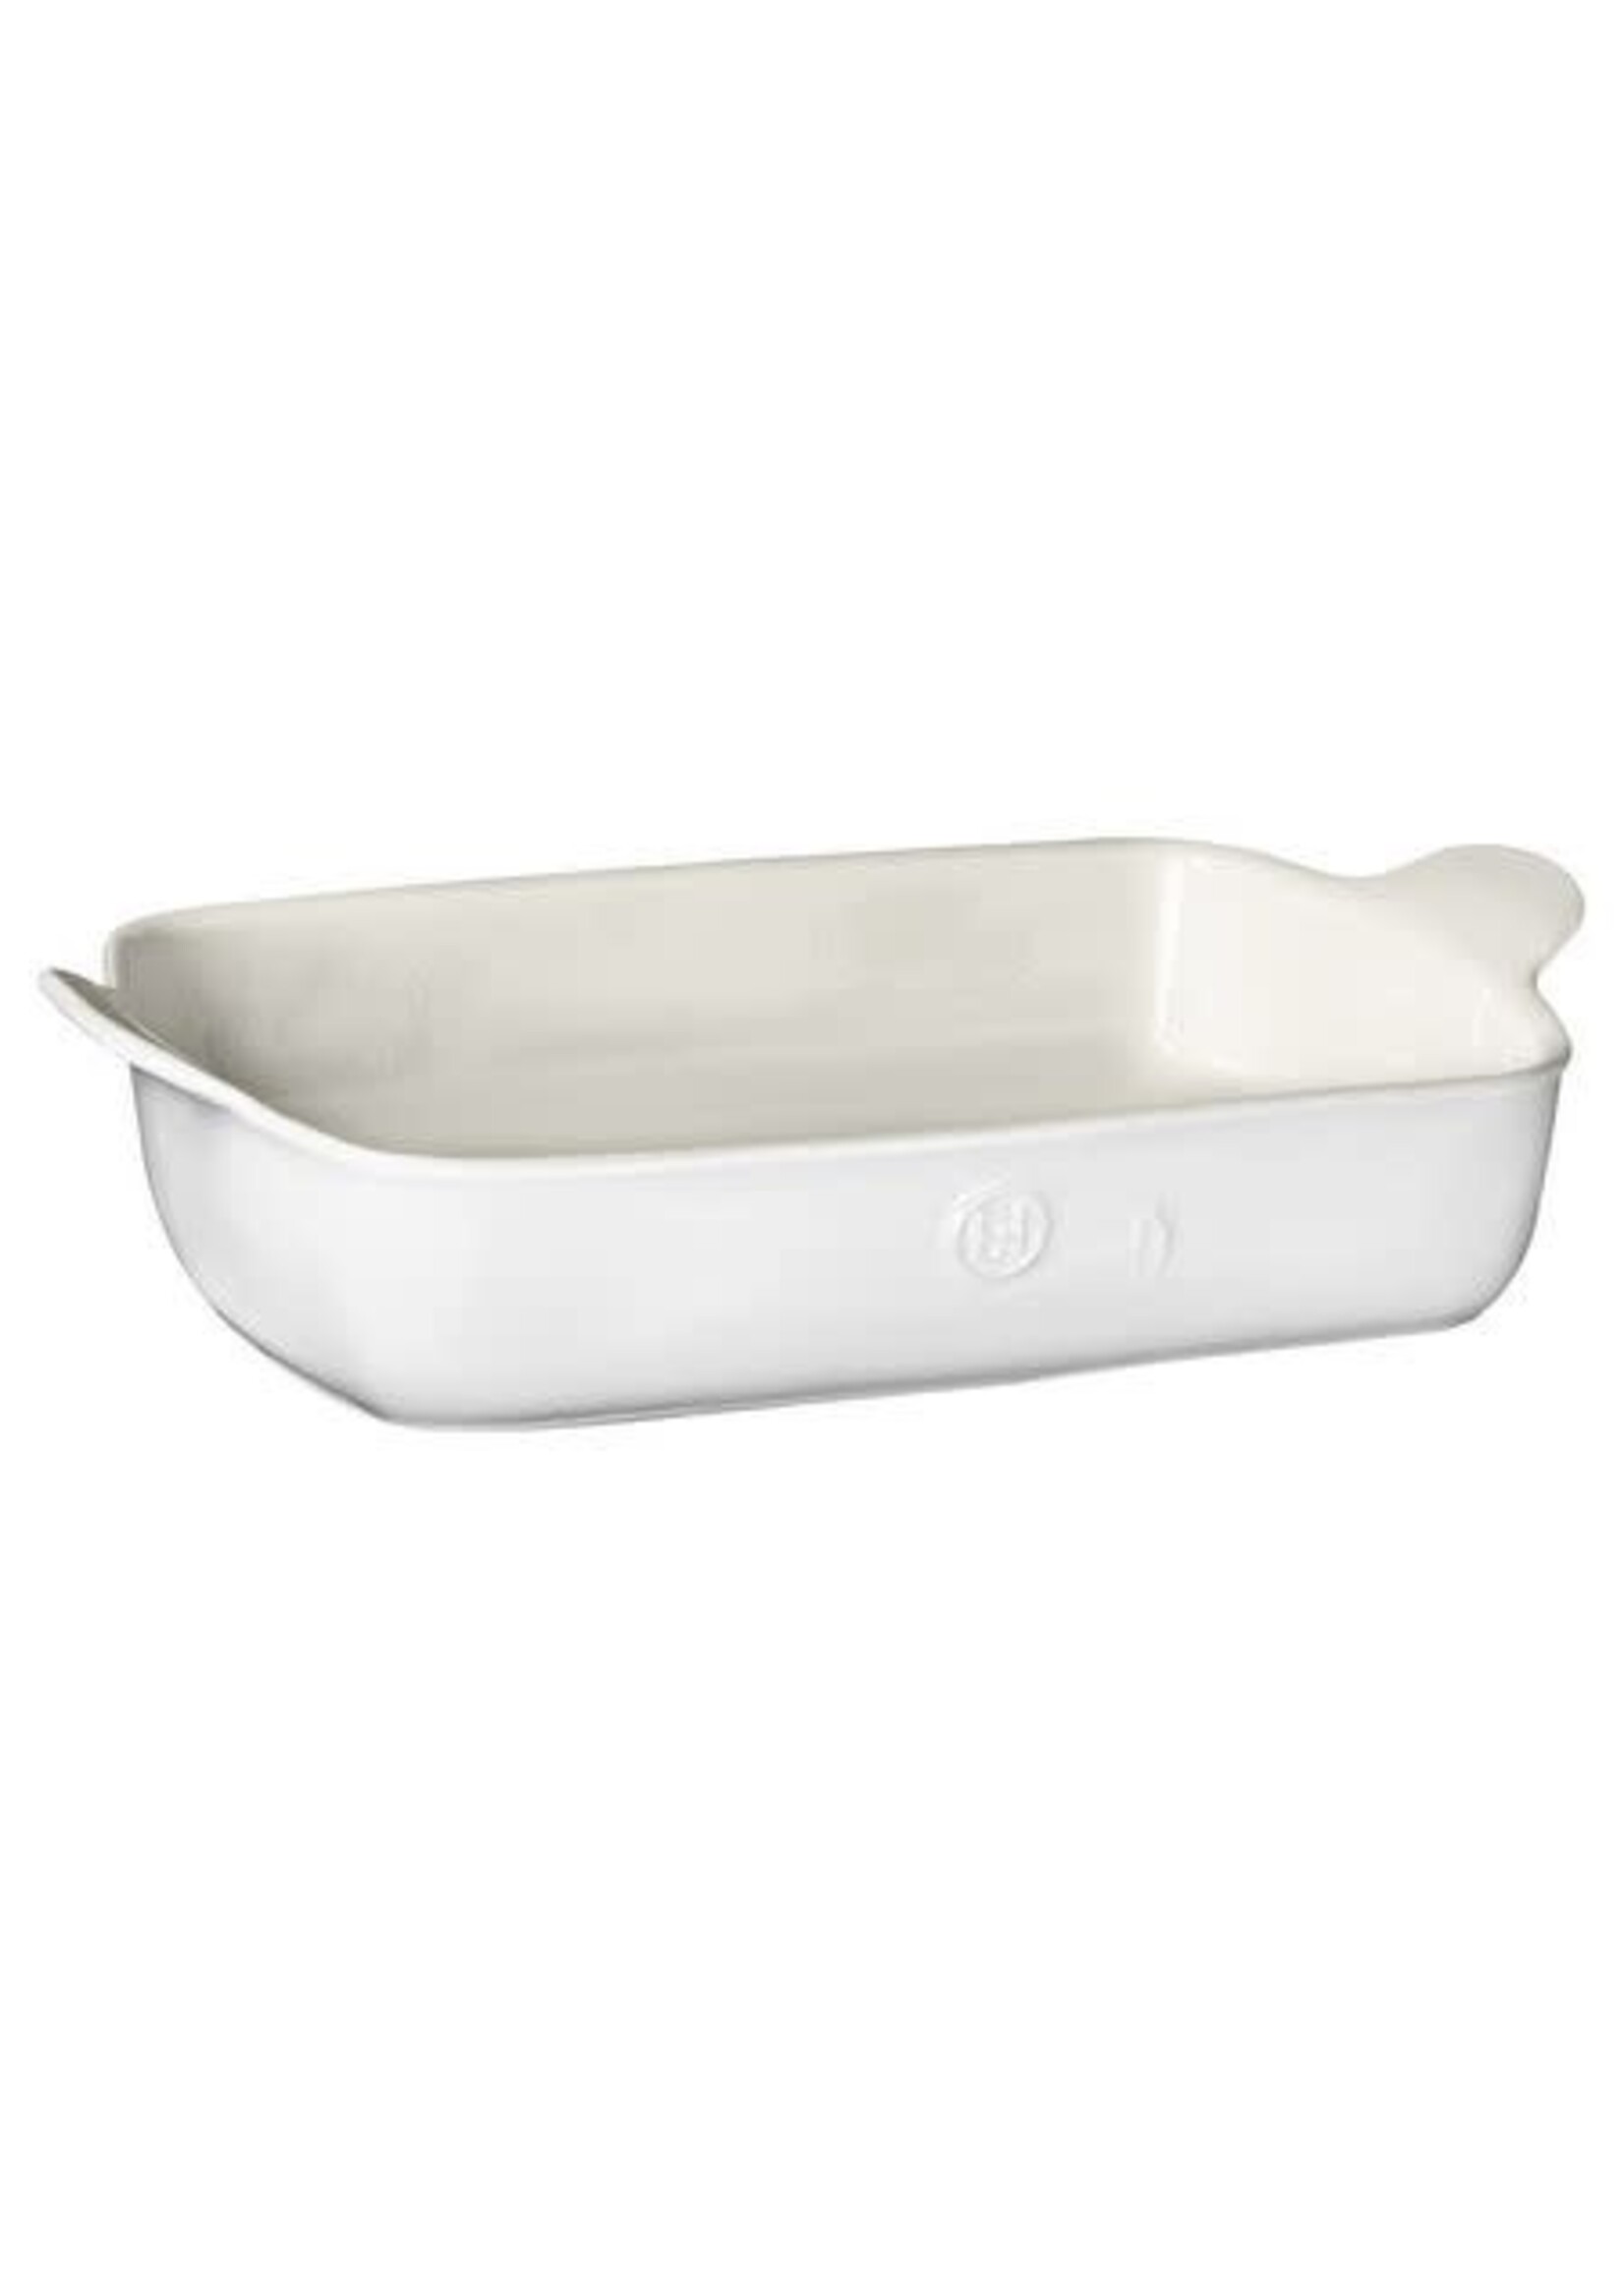 Bakeware, Casseroles, Baking Dishes, and more Shop